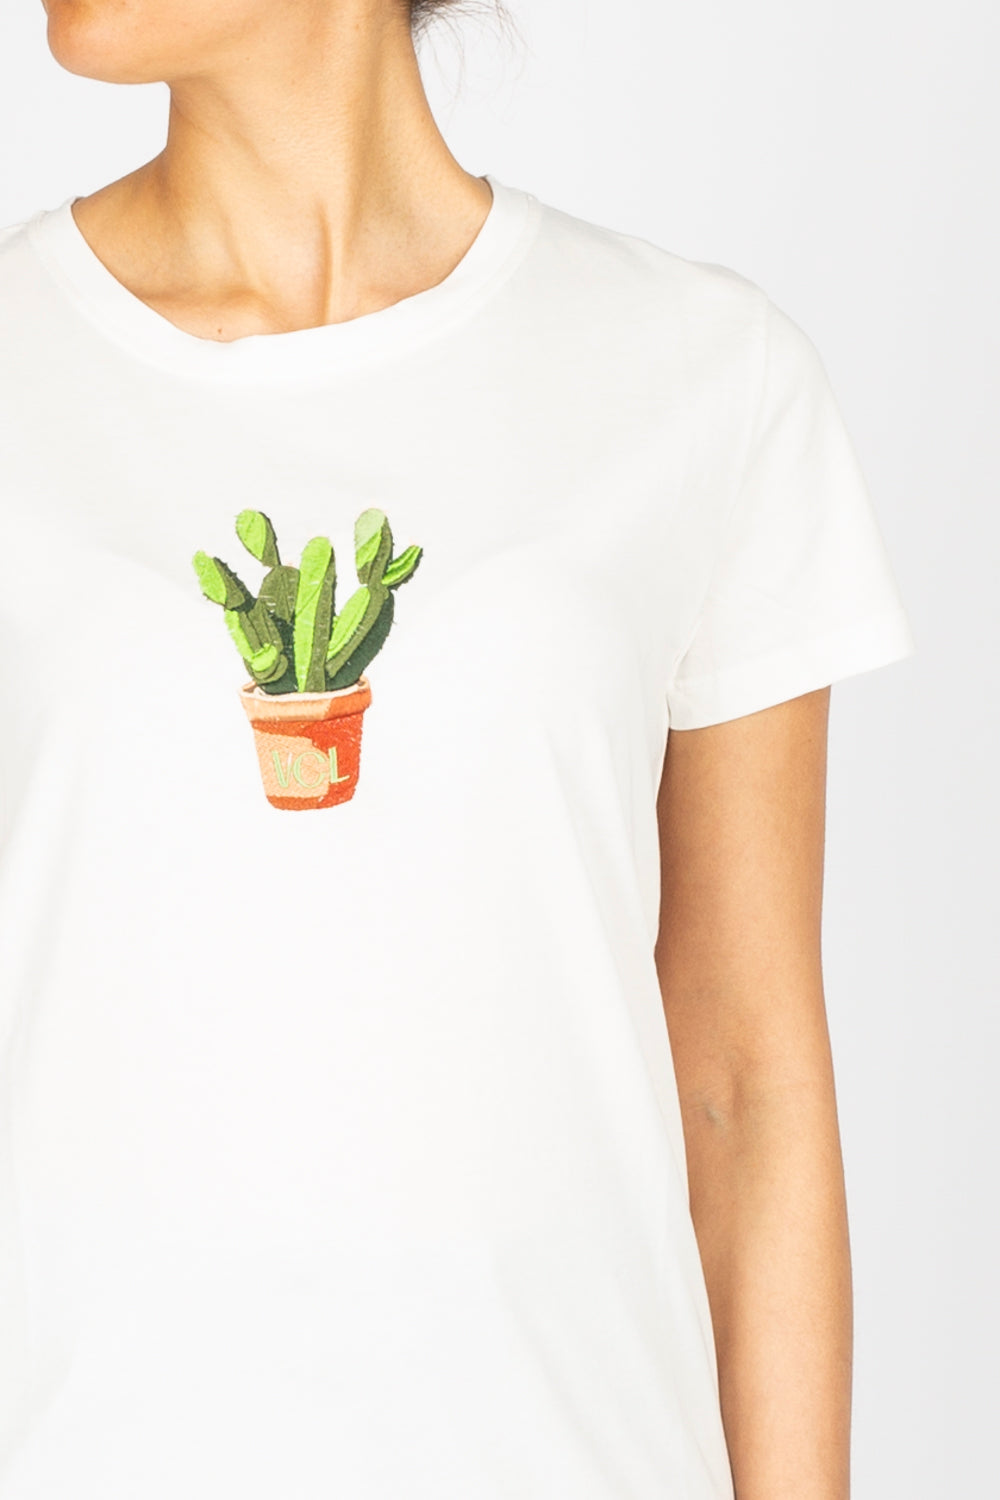 VICOLO - RB0548 - T-SHIRT STAMPA CACTUS